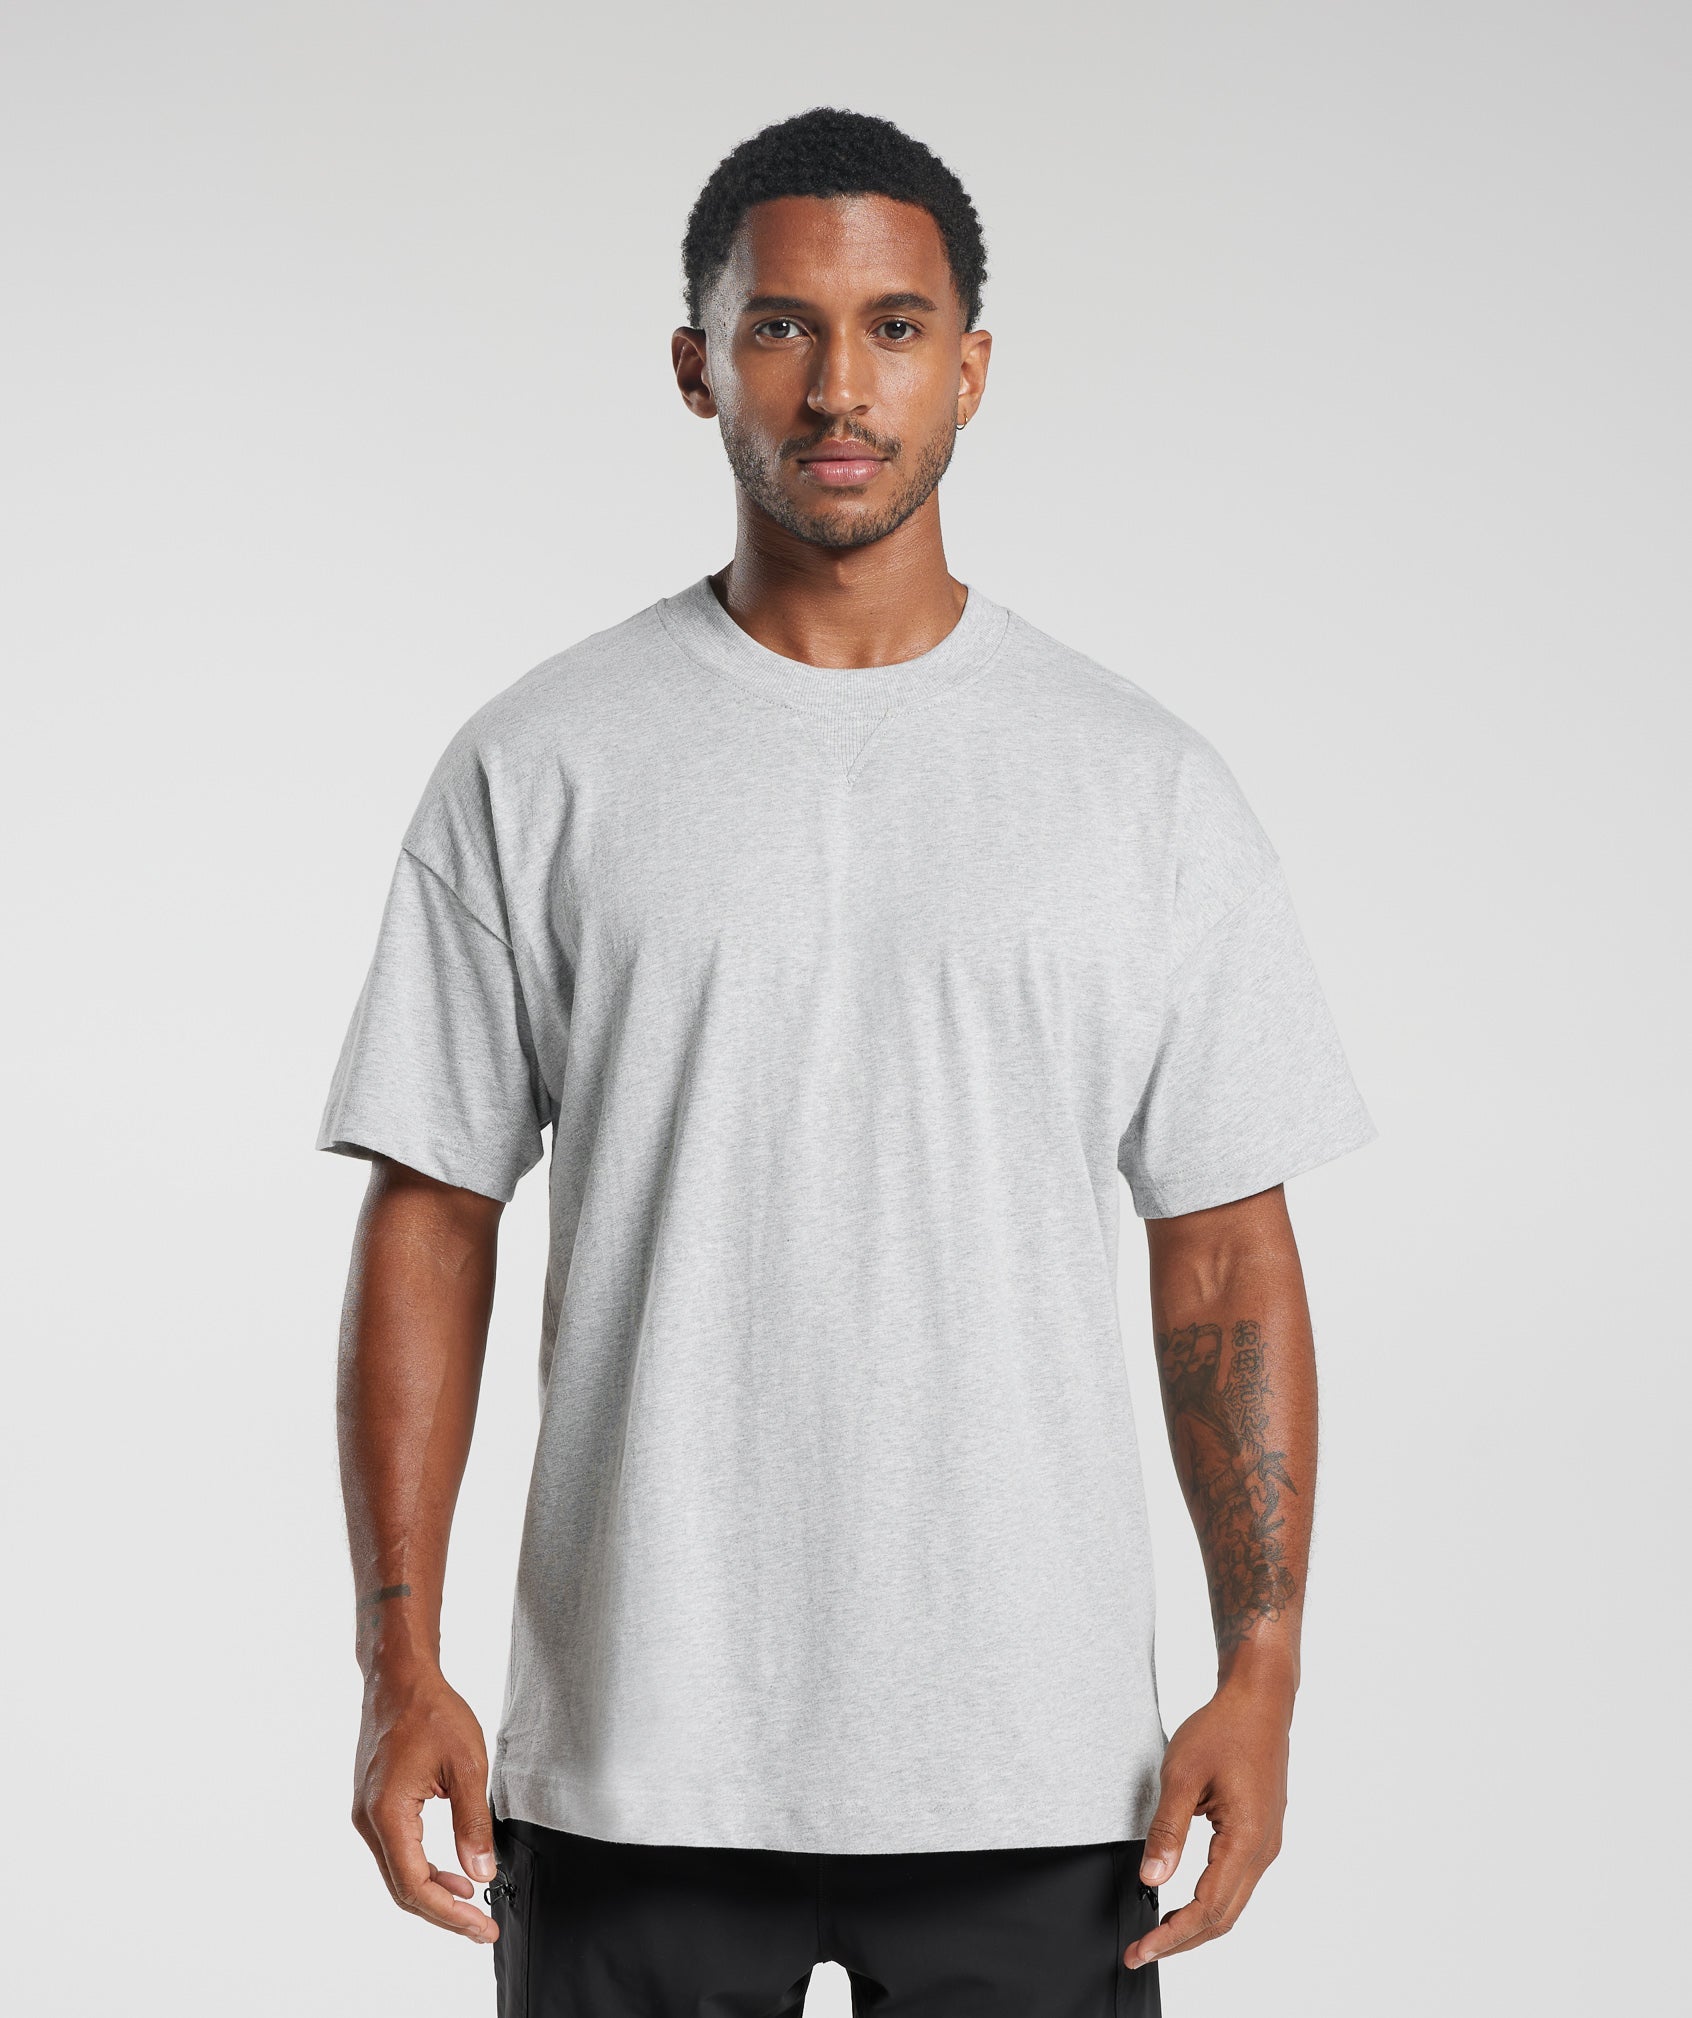 Rest Day Essentials T-Shirt in Light Grey Core Marl - view 1